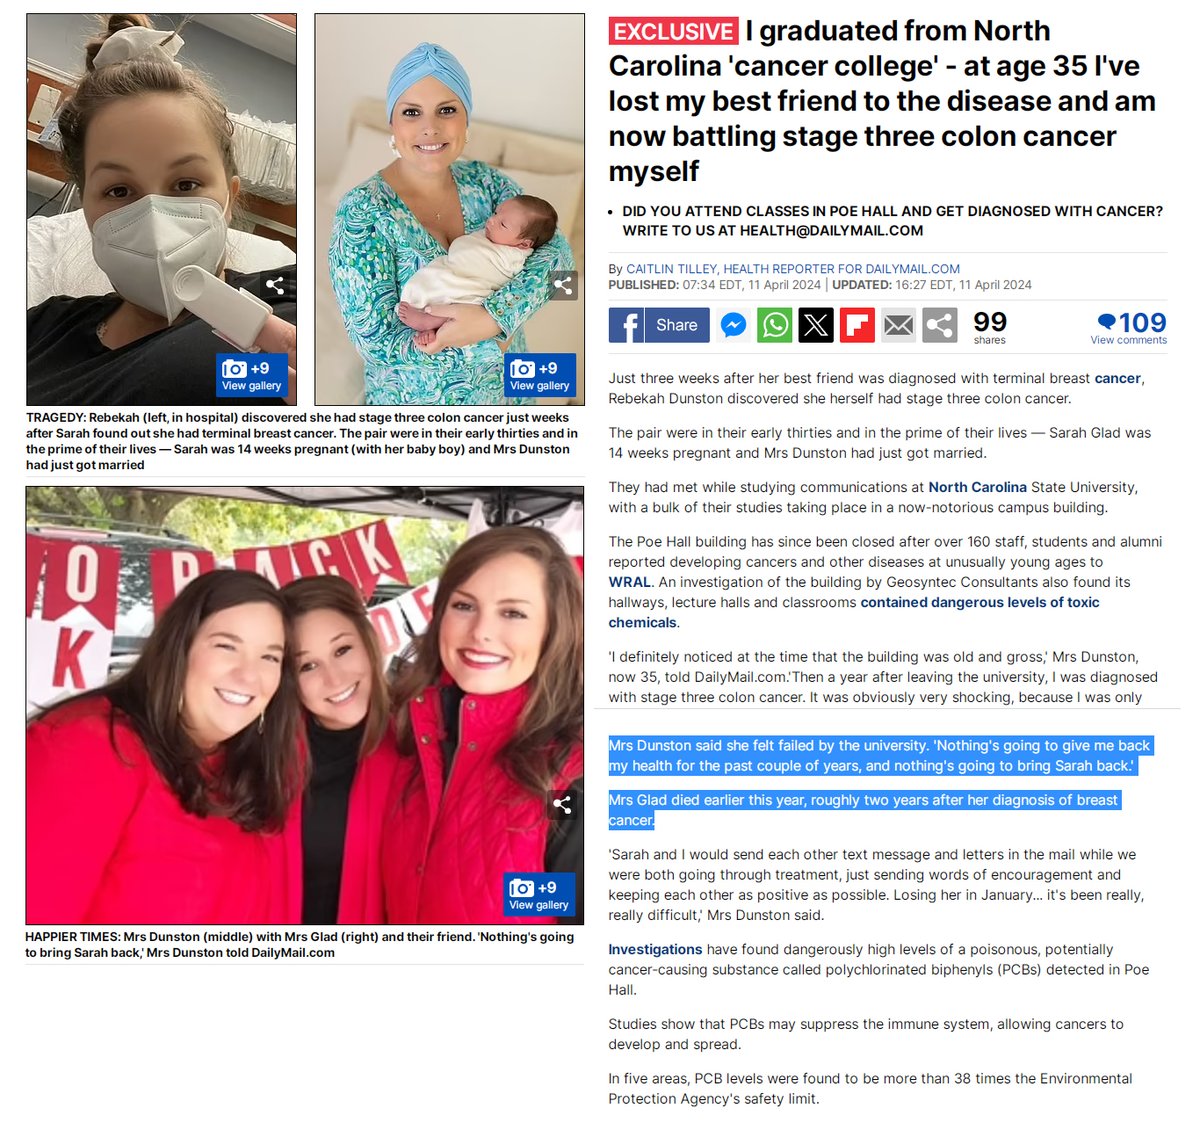 Two friends in 30s diagnosed with terminal cancer Sarah Glad was diagnosed with terminal breast cancer & 3 weeks later her best friend 35 year old Rebekah Dunston was diagnosed with Stage 3 Colon Cancer COVID-19 Vaccine Turbo Cancer cases are at all time highs #DiedSuddenly